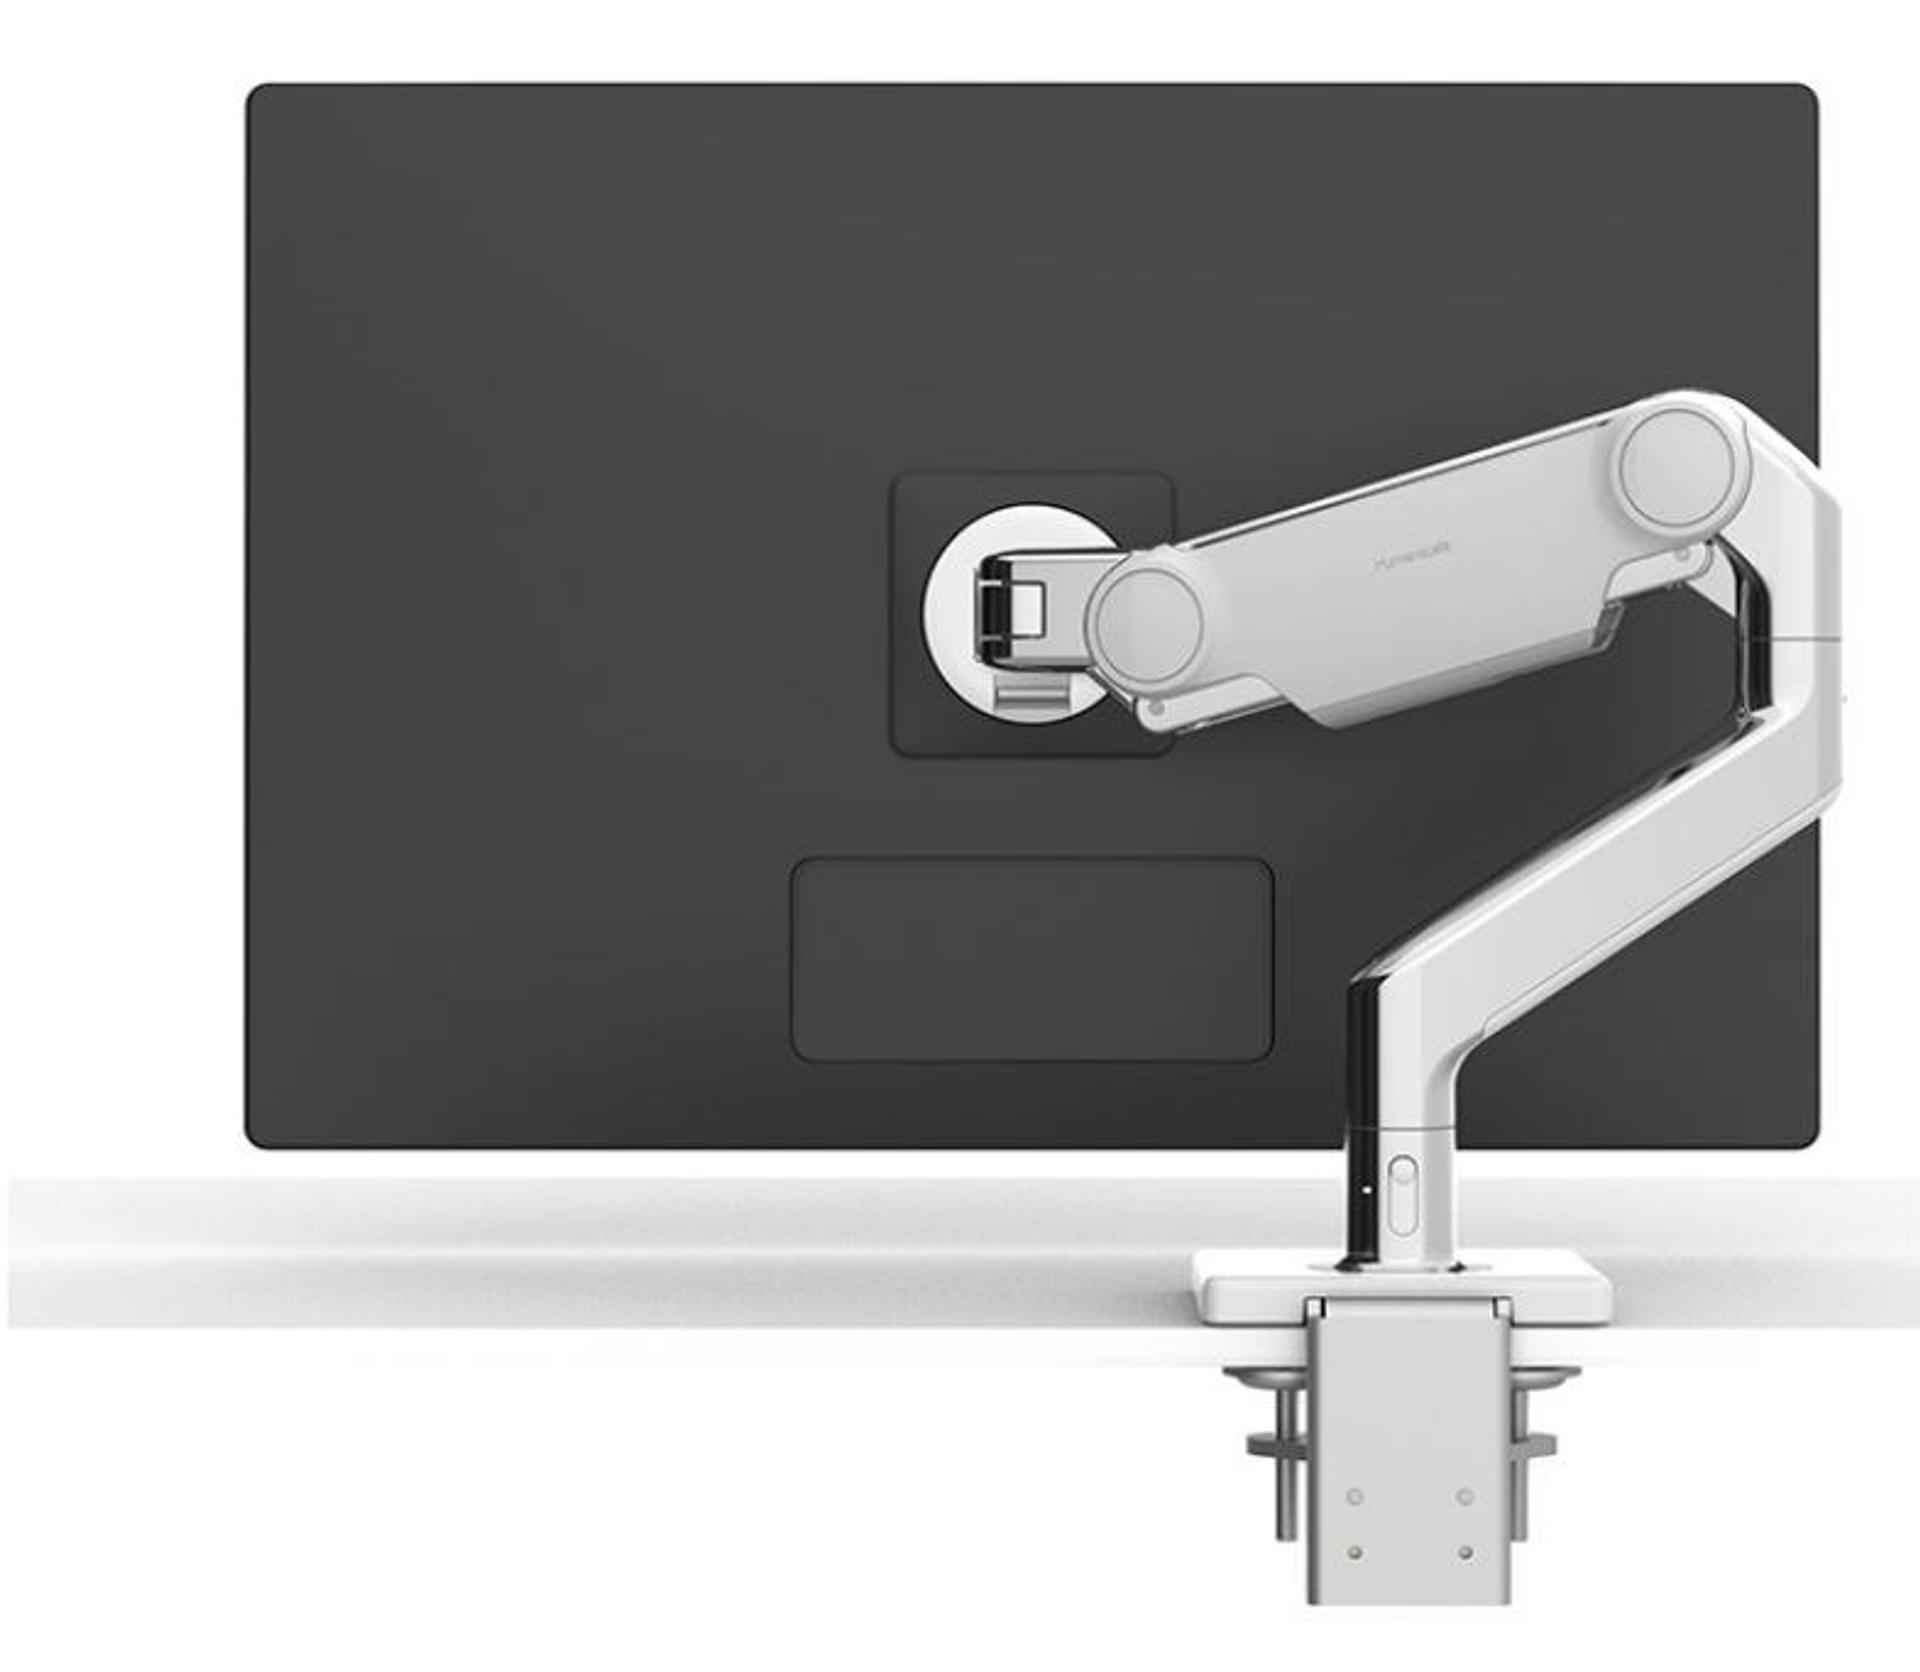 Humanscale M10 monitor arm